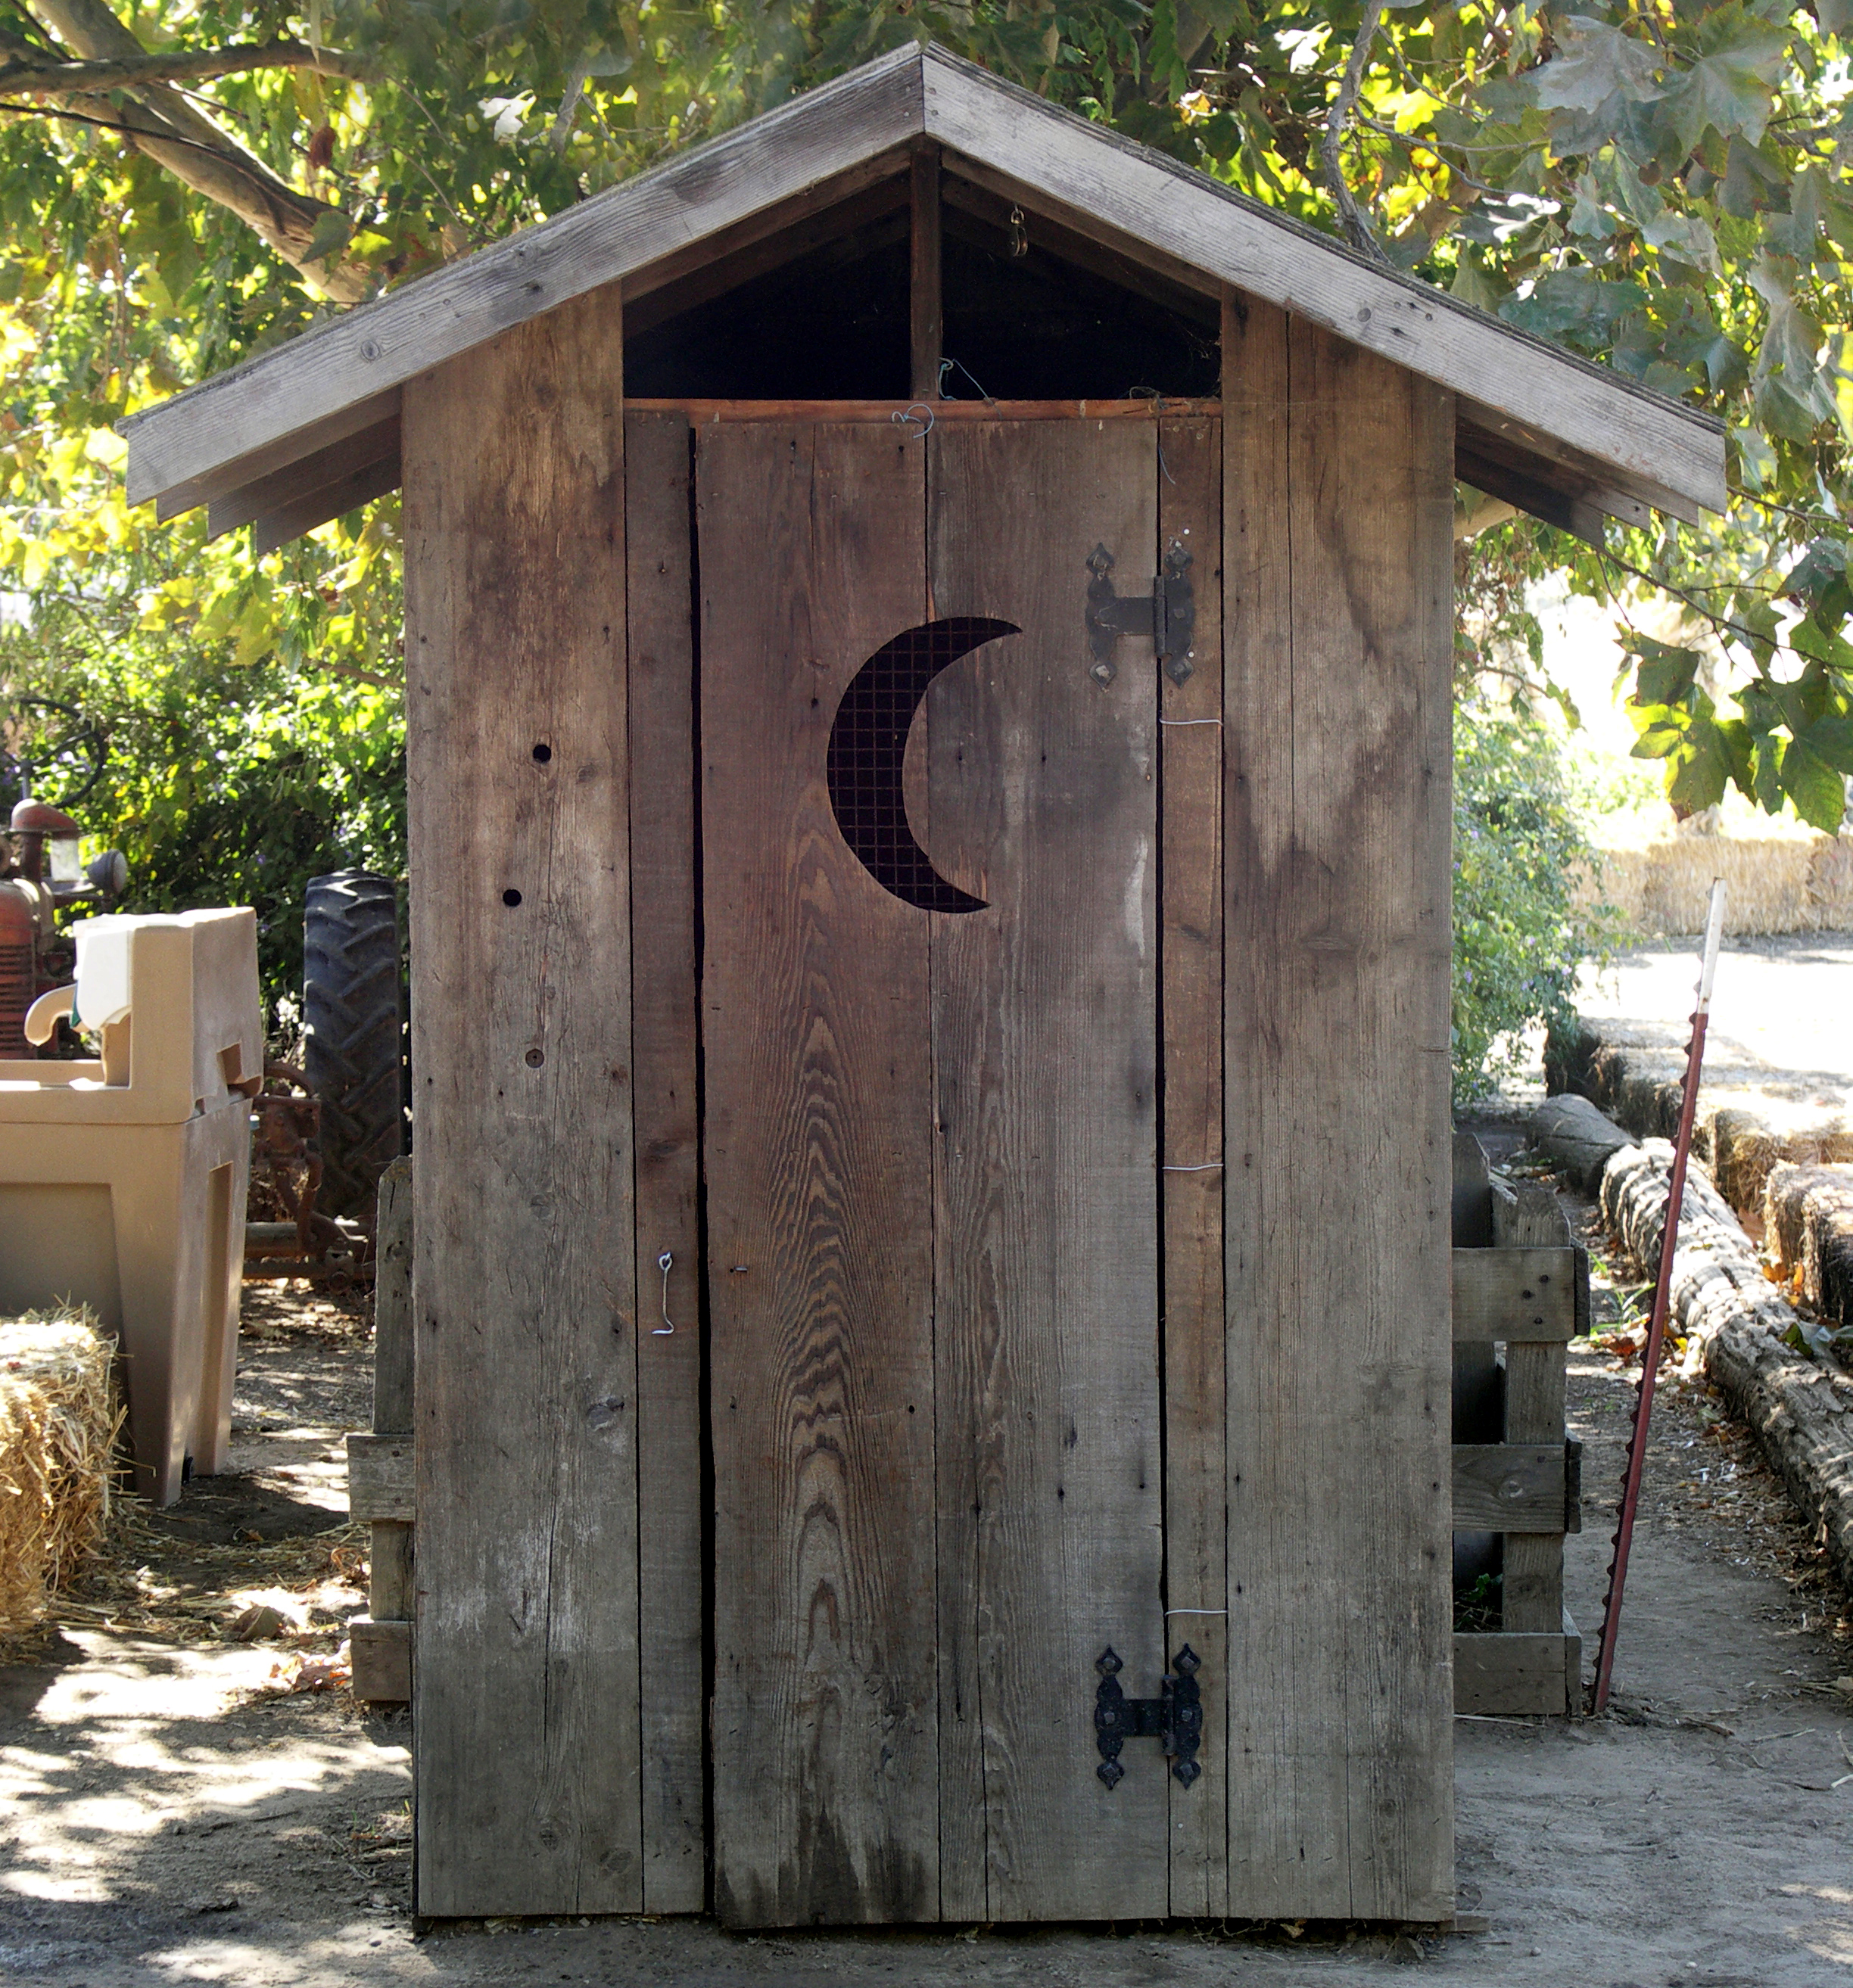 Why Do Outhouses Have a Crescent Moon on the Door?